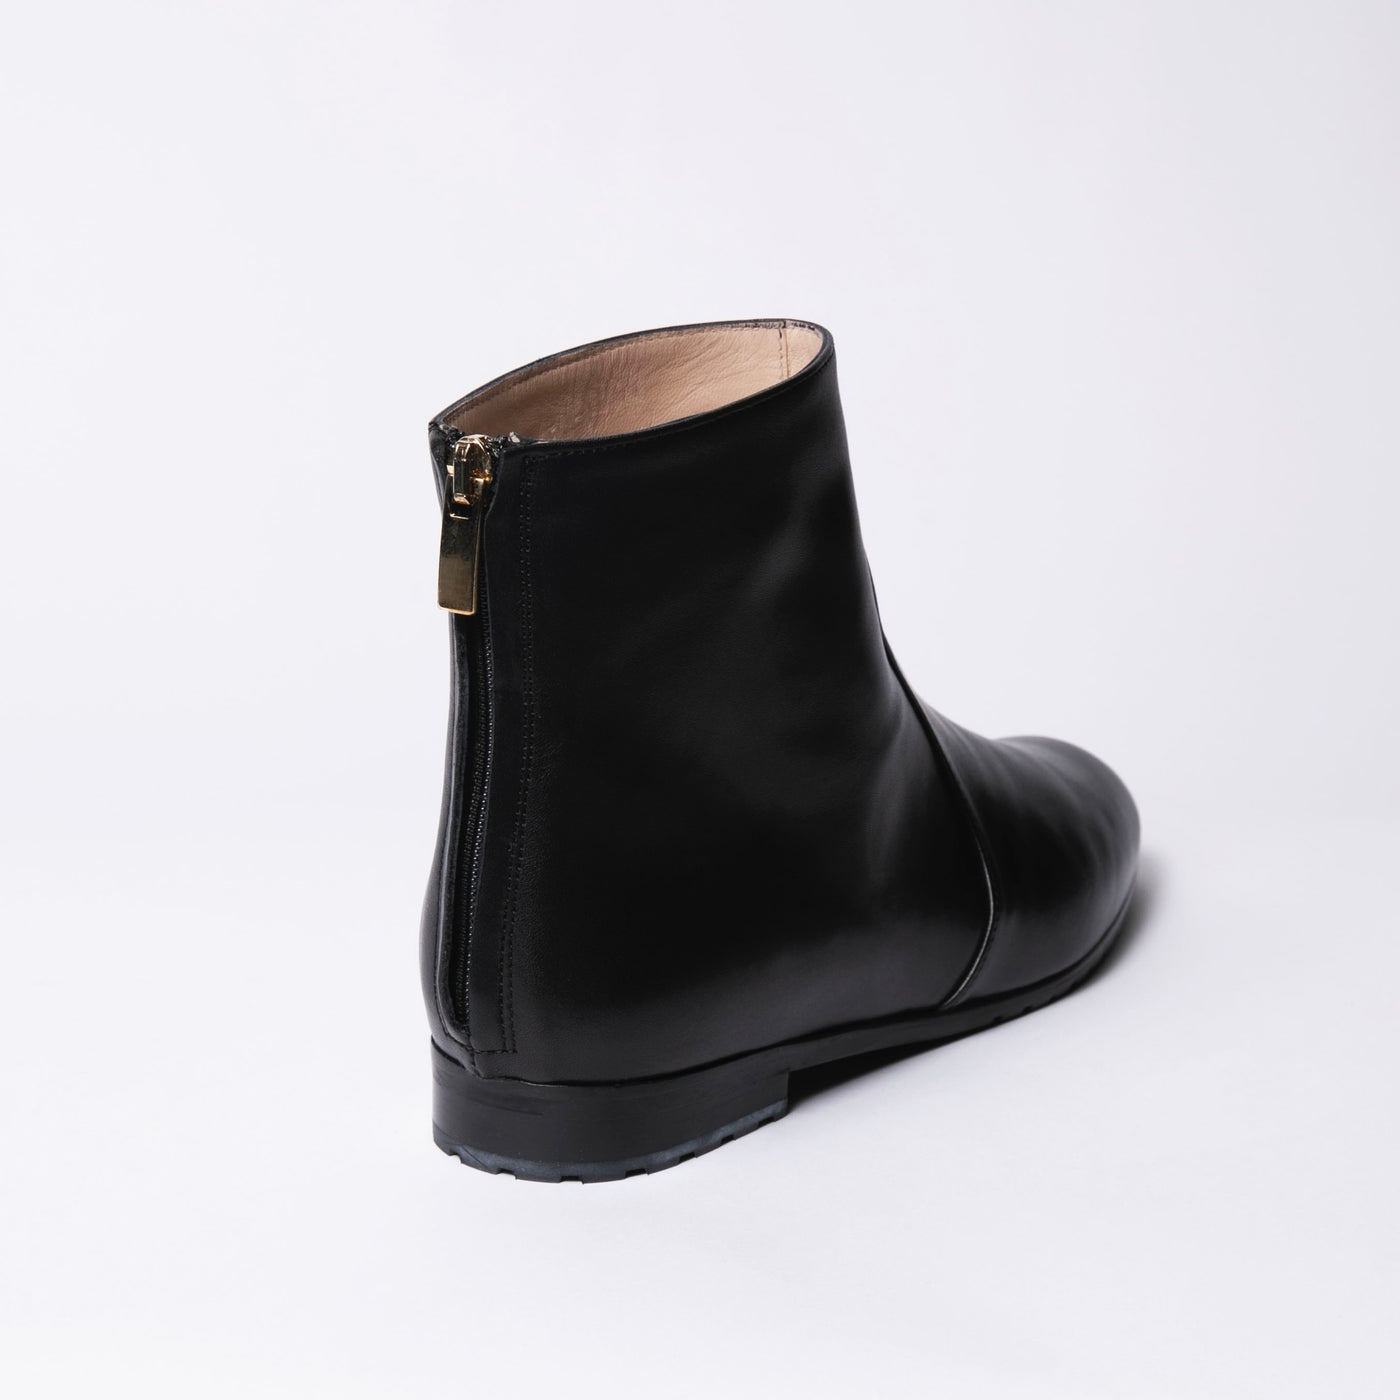 Black leather ankle boots with zipper in the back. 